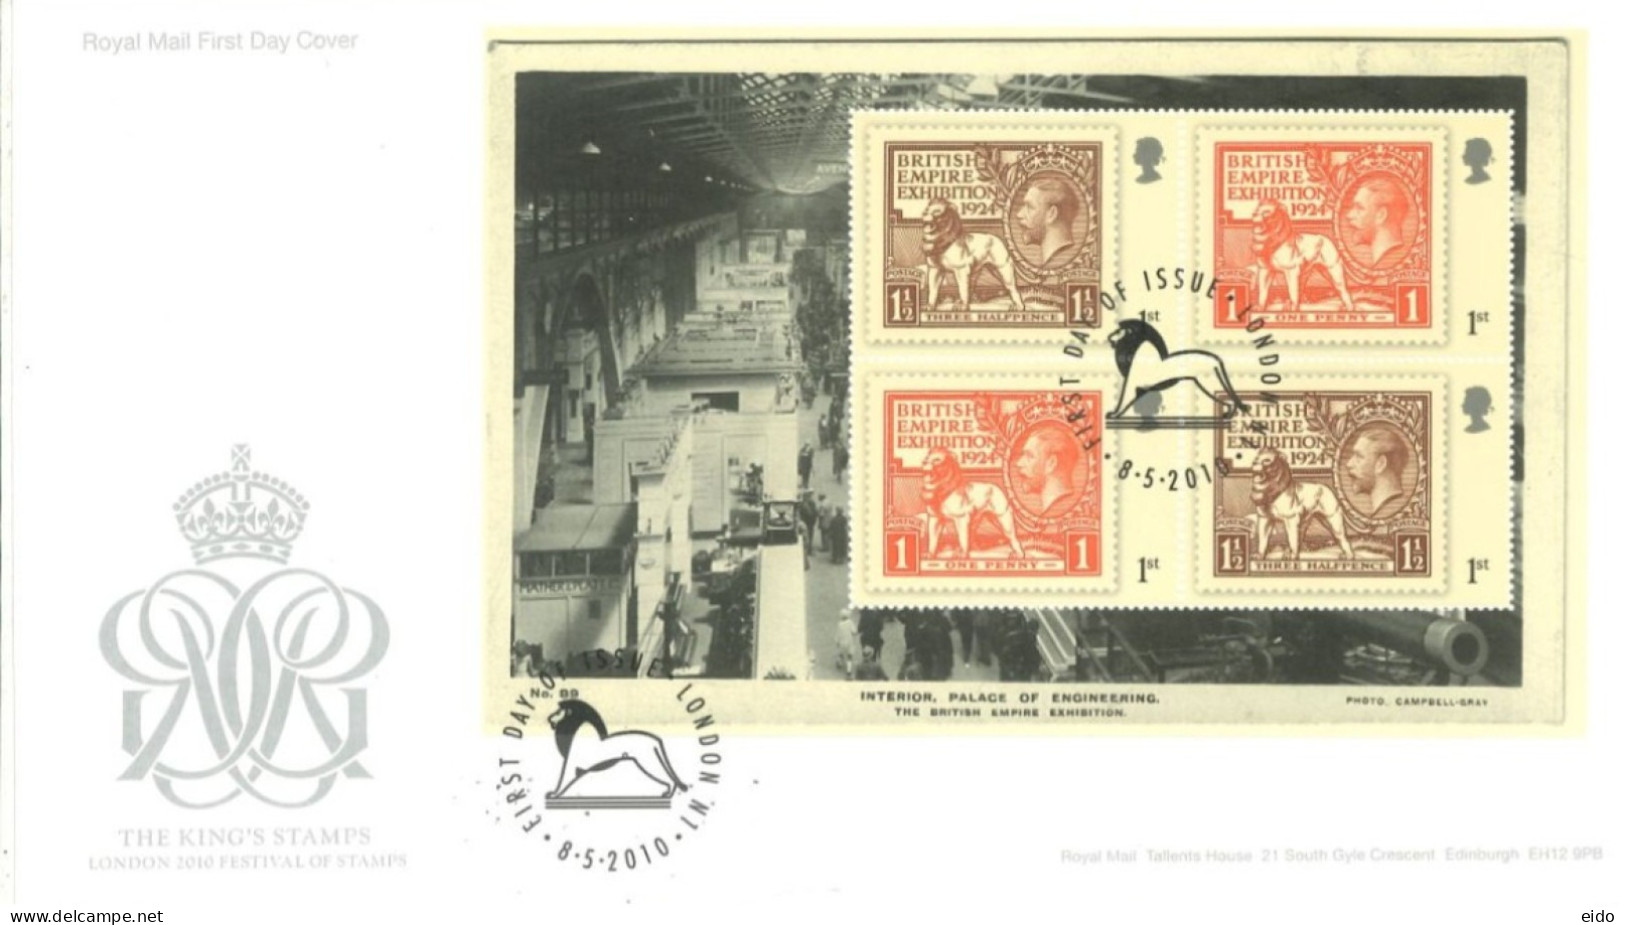 GREAT BRITAIN - 2010, FDC OF MINIATURE SHEET OF THE KING'S STAMPS, LONDON 2010 FESTIVAL OF STAMPS. - Covers & Documents